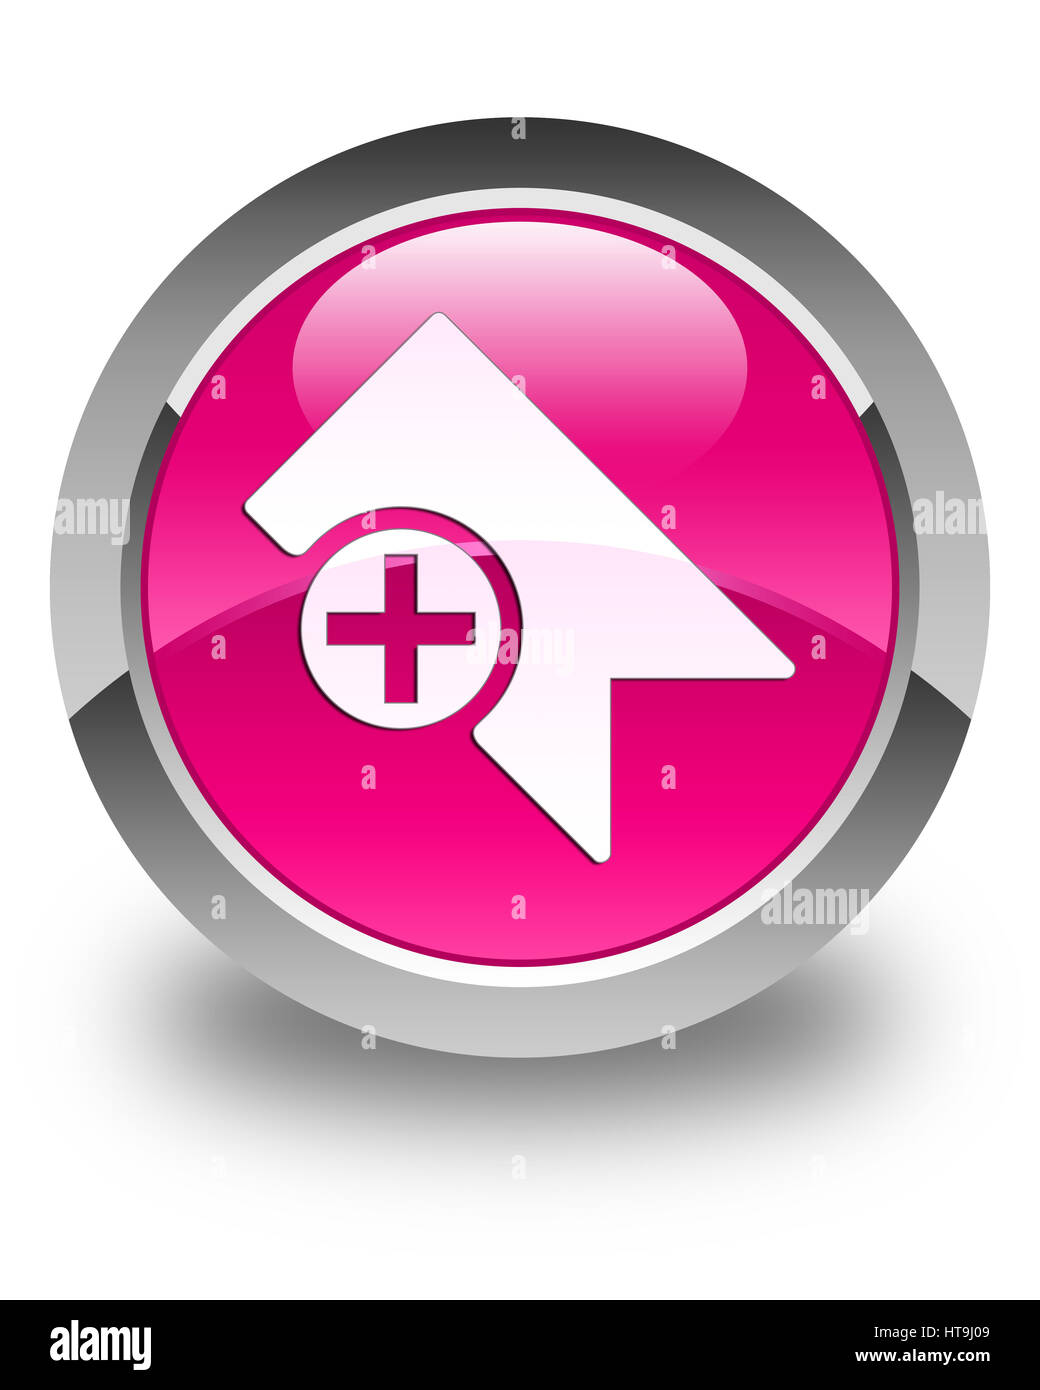 Bookmark icon isolated on glossy pink round button abstract illustration Stock Photo